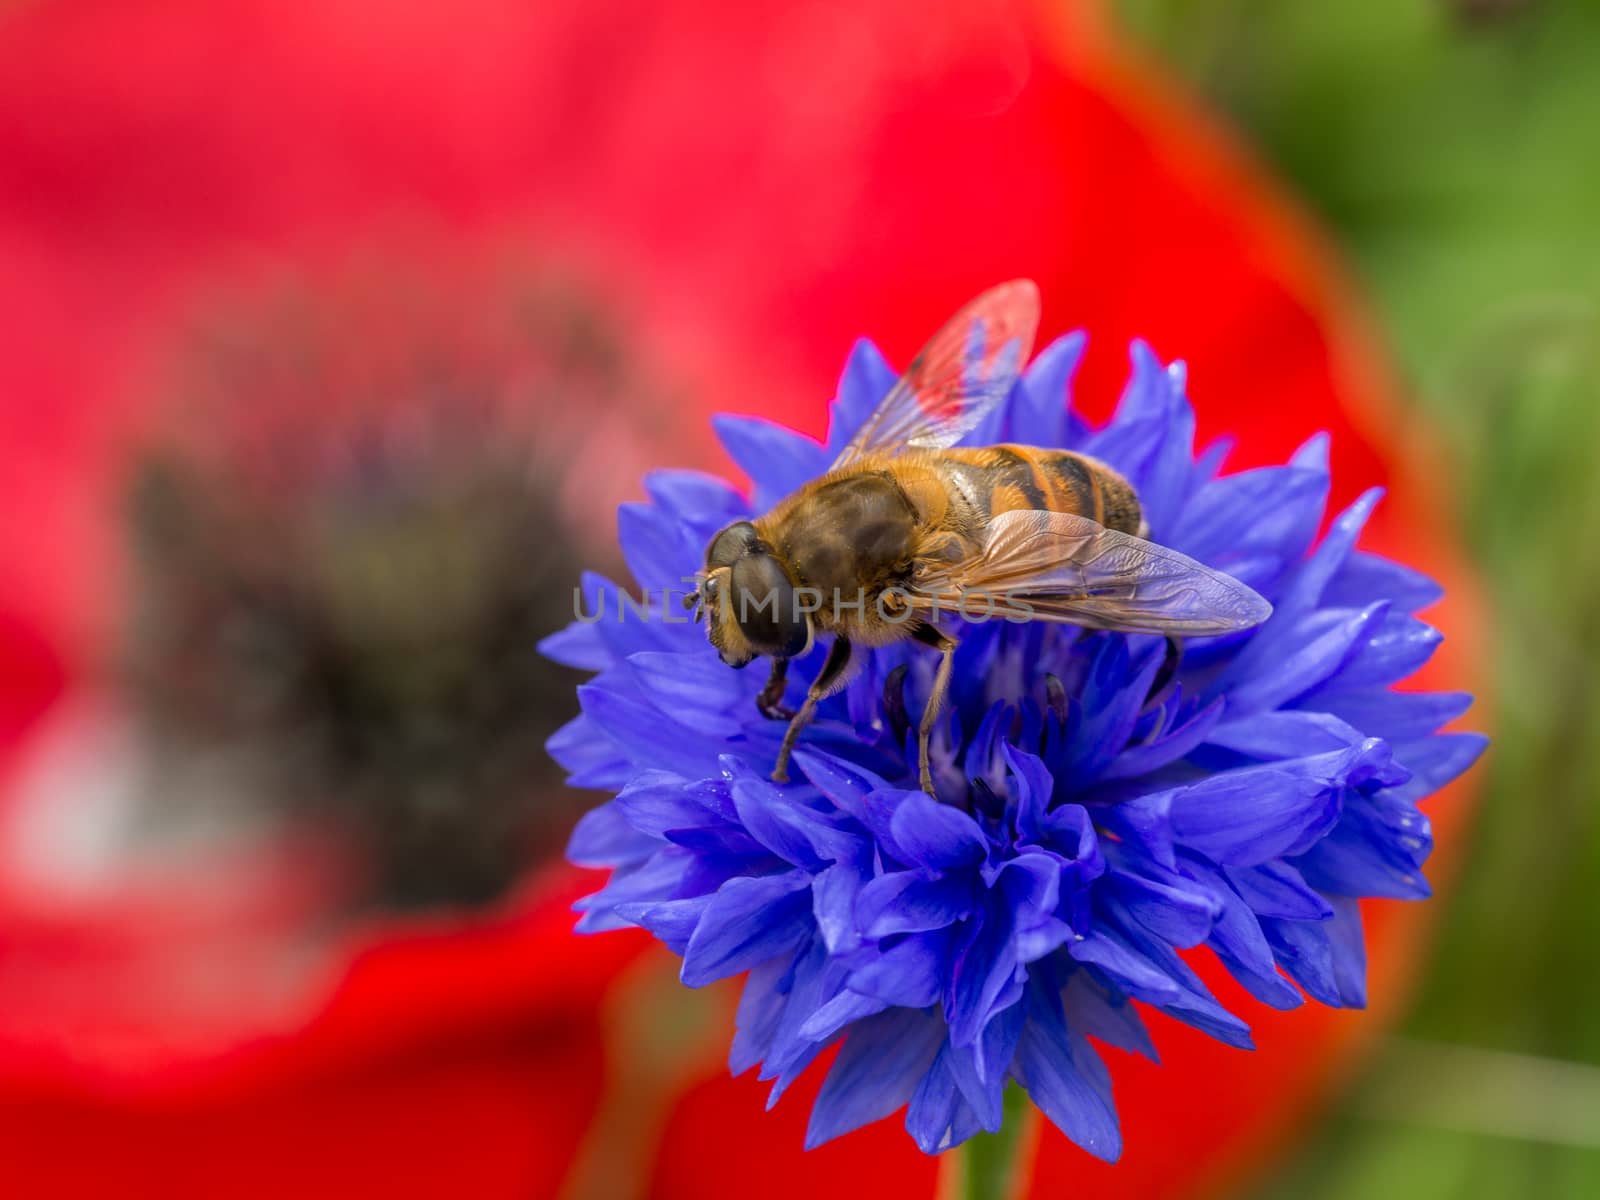 Closeup of a solitary bee resting on a small blue wild flower with a red poppy filling the shot